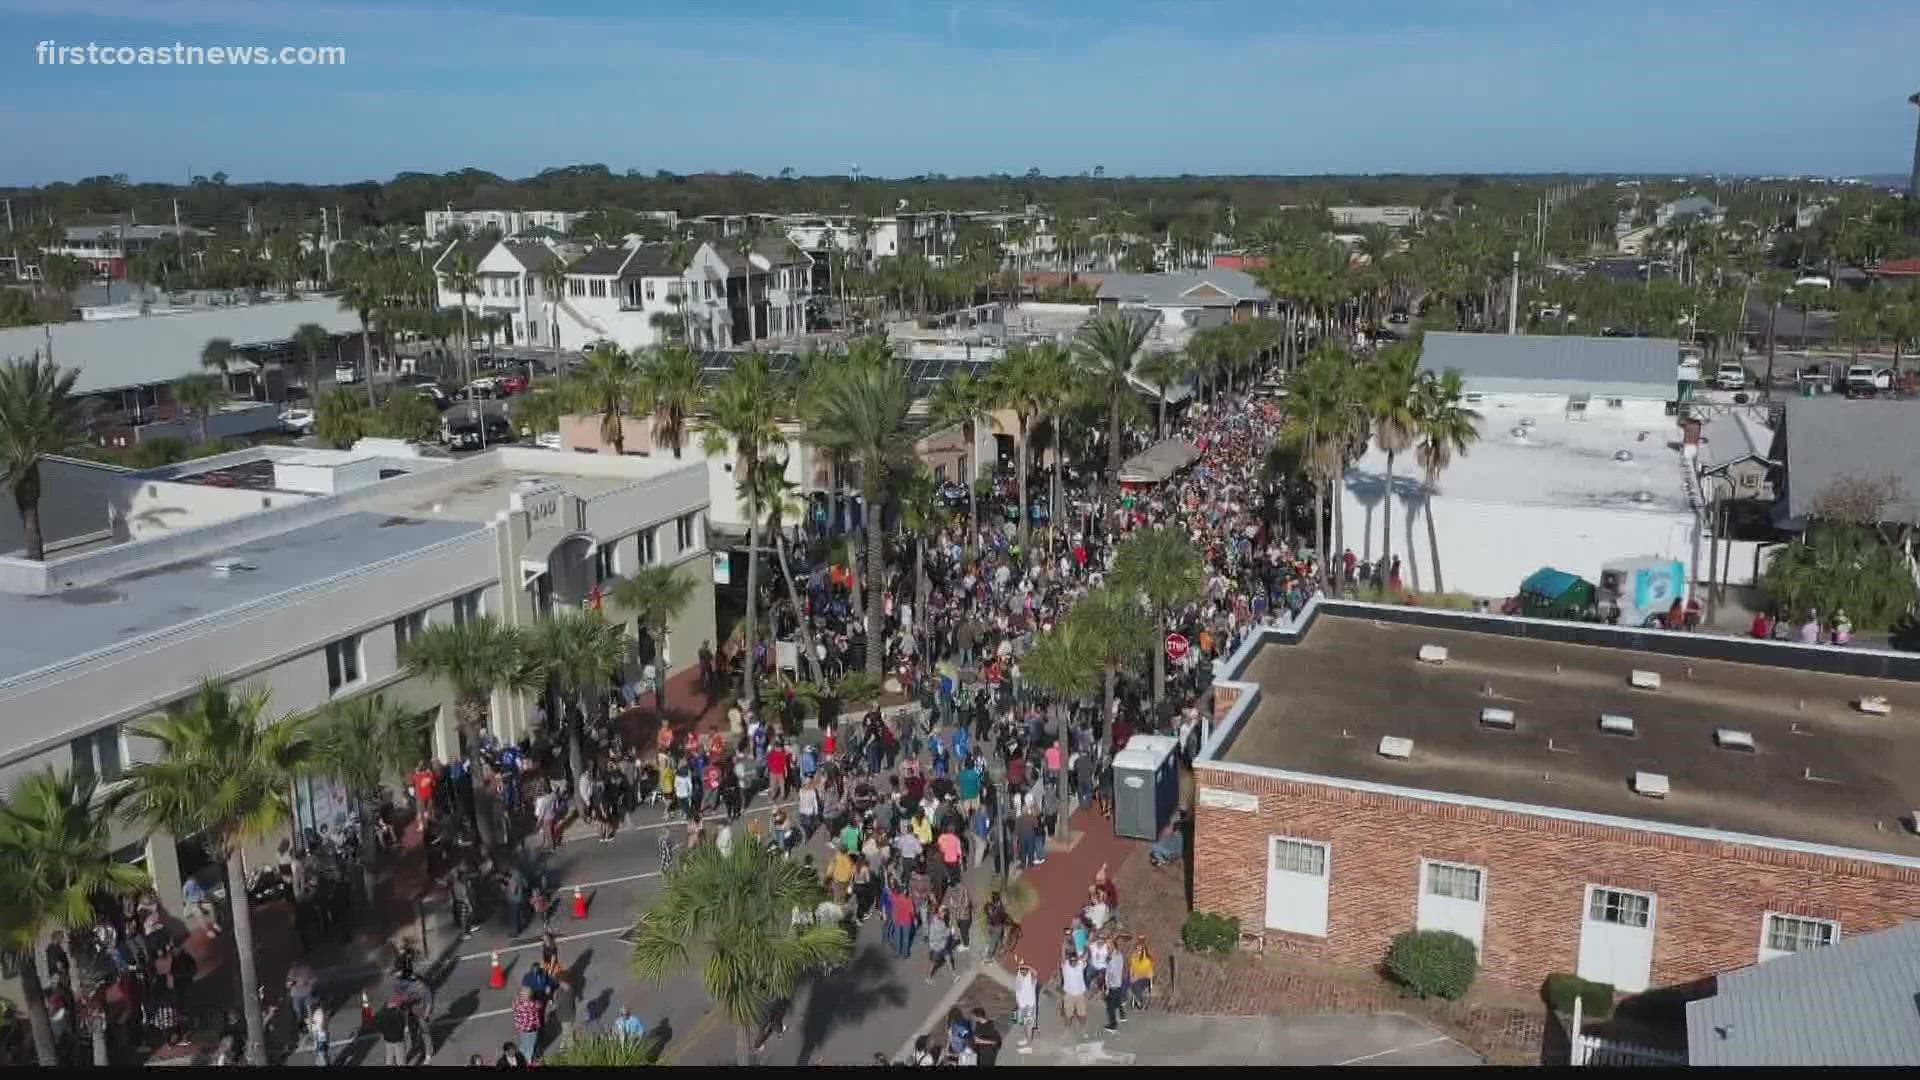 Crowds gather for annual Thanksgiving tradition at Pete's Bar in Neptune Beach